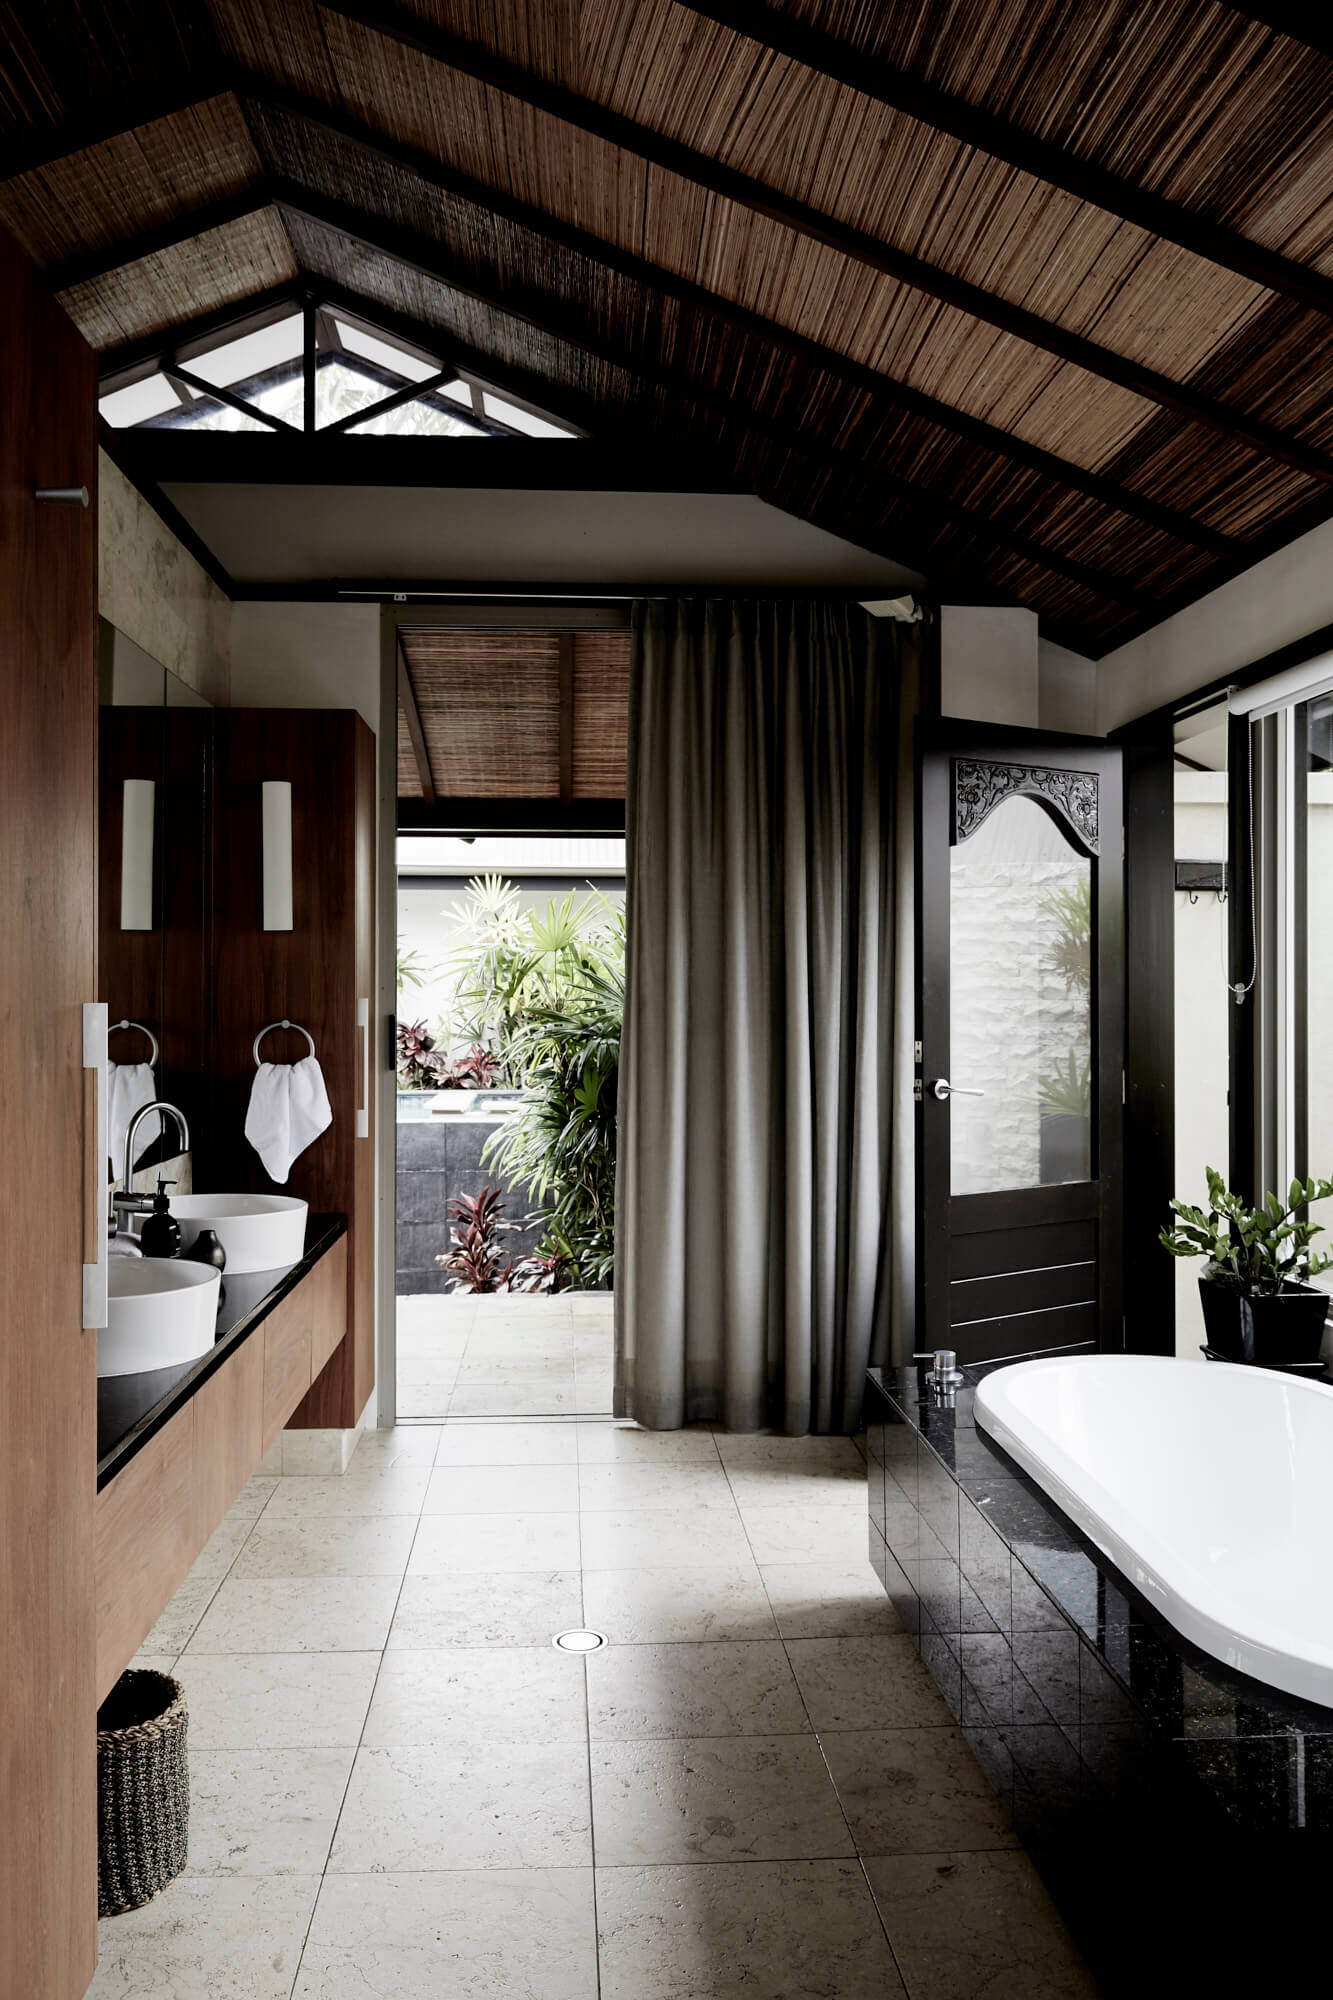 Grand master ensuite at The Villas of Byron with bathtub, heated marble floors, double vanity and views to lush gardens outside